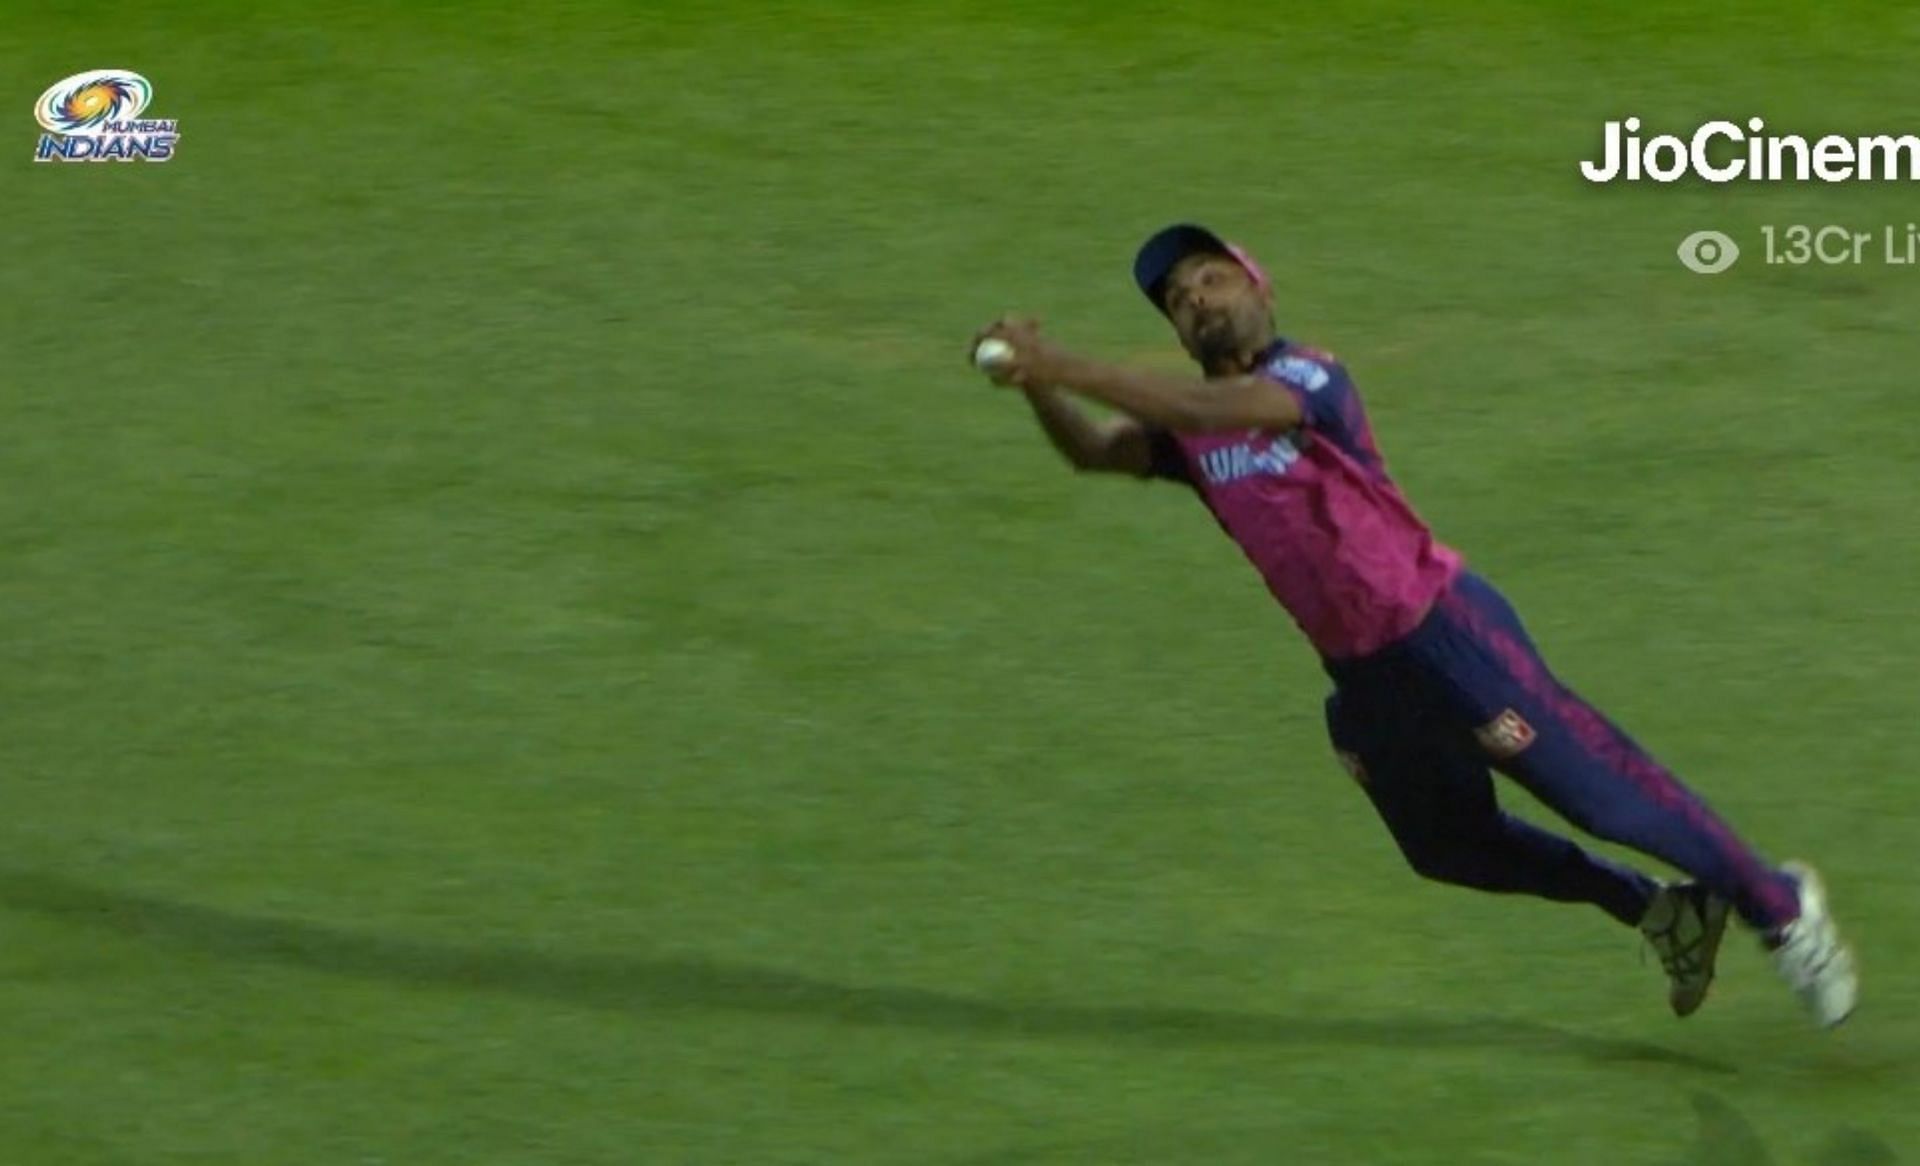 Read more about the article [WATCH] Sandeep Sharma takes arguably the catch of IPL 2023 to dismiss Suryakumar Yadav during RR vs MI clash